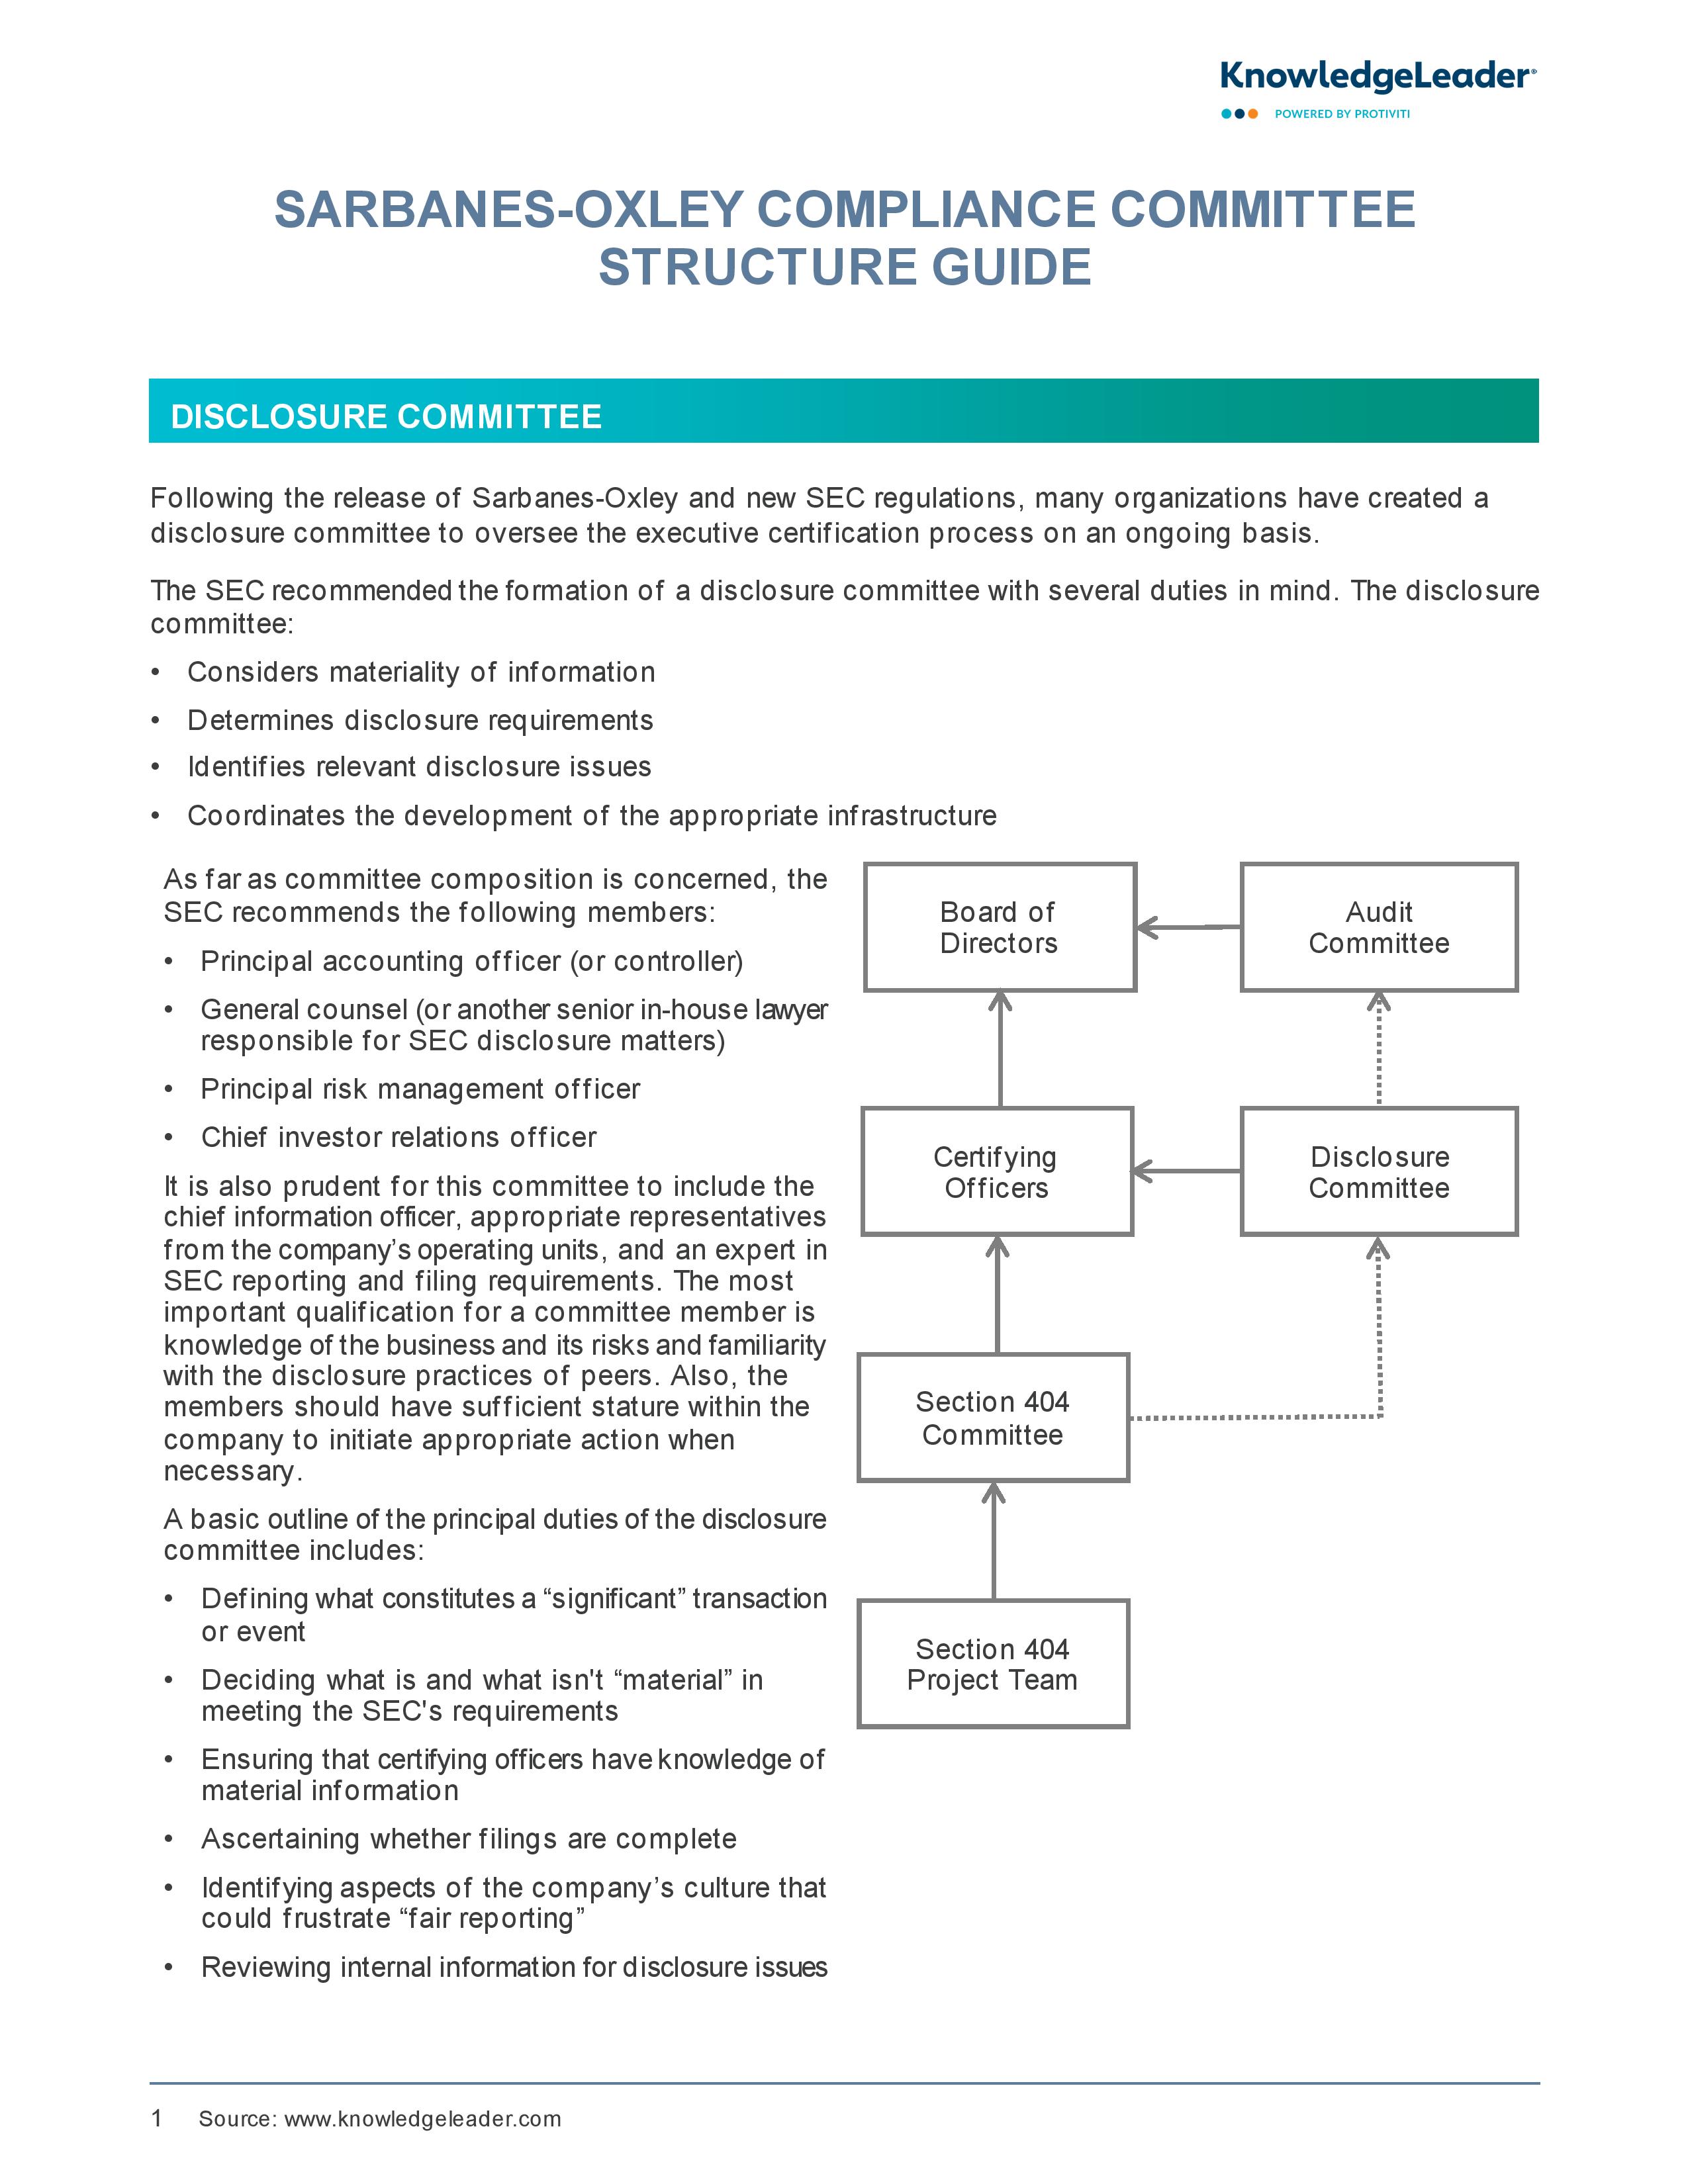 screenshot of the first page of Sarbanes-Oxley Compliance Committee Structure Guide